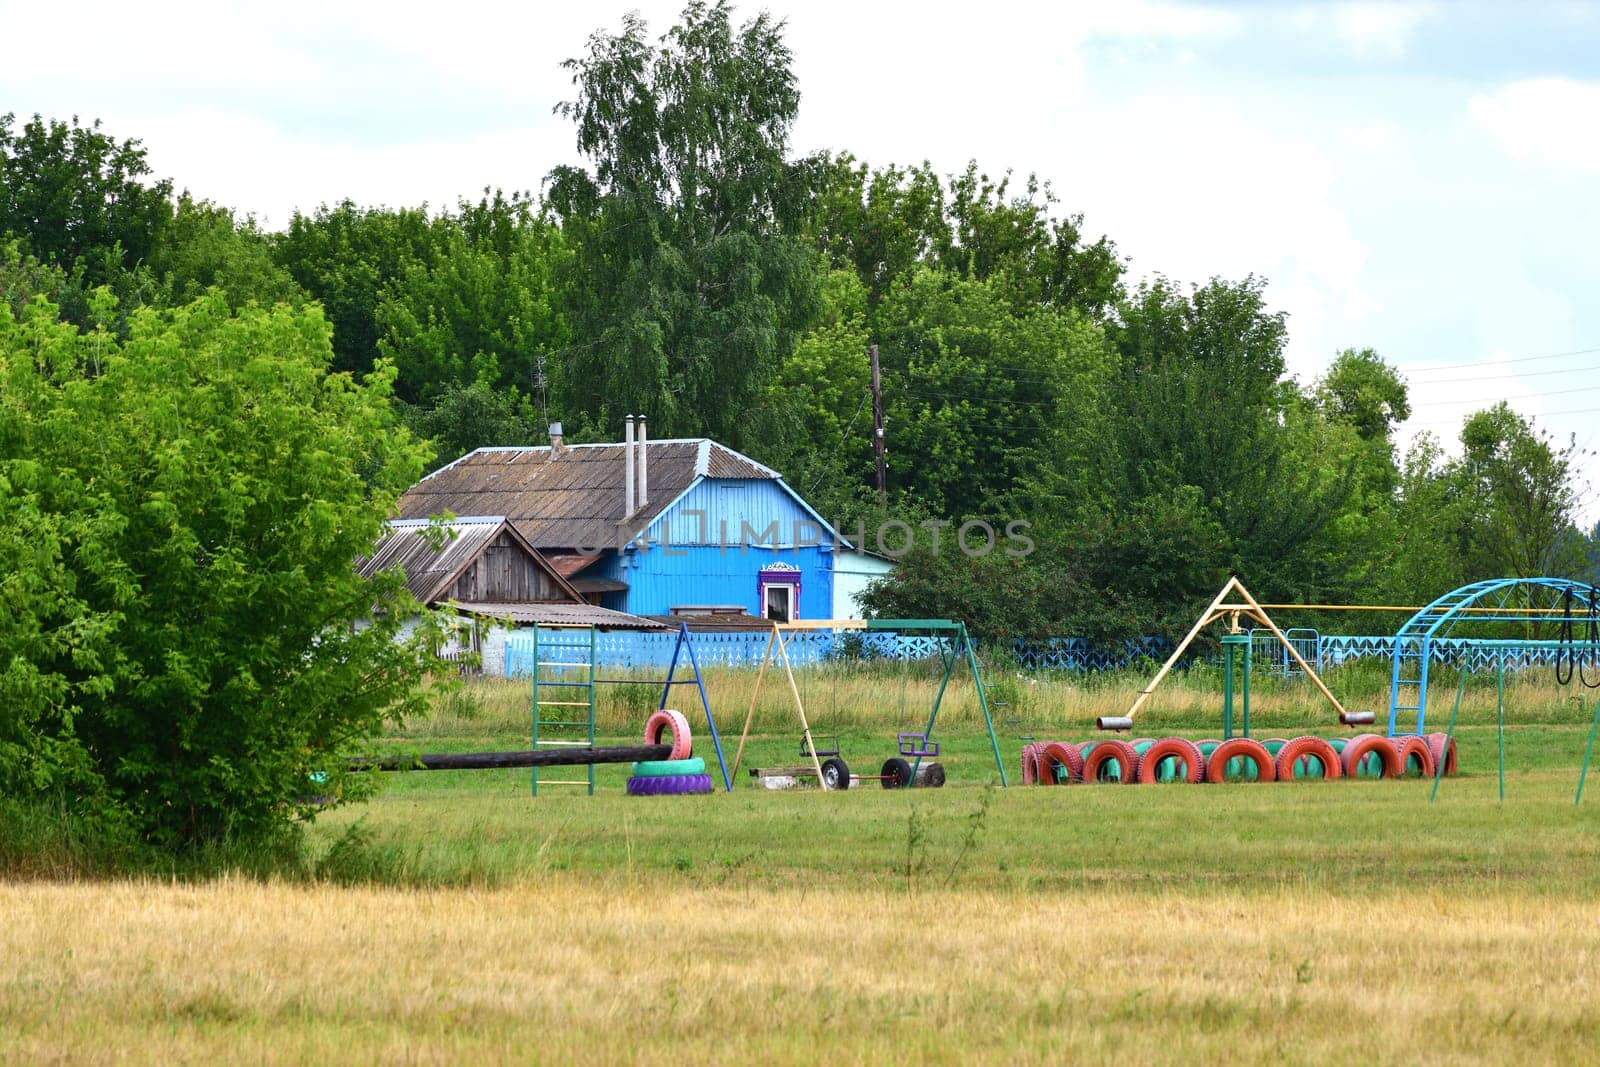 Rural house with homemade children's playground made from tires, Russia